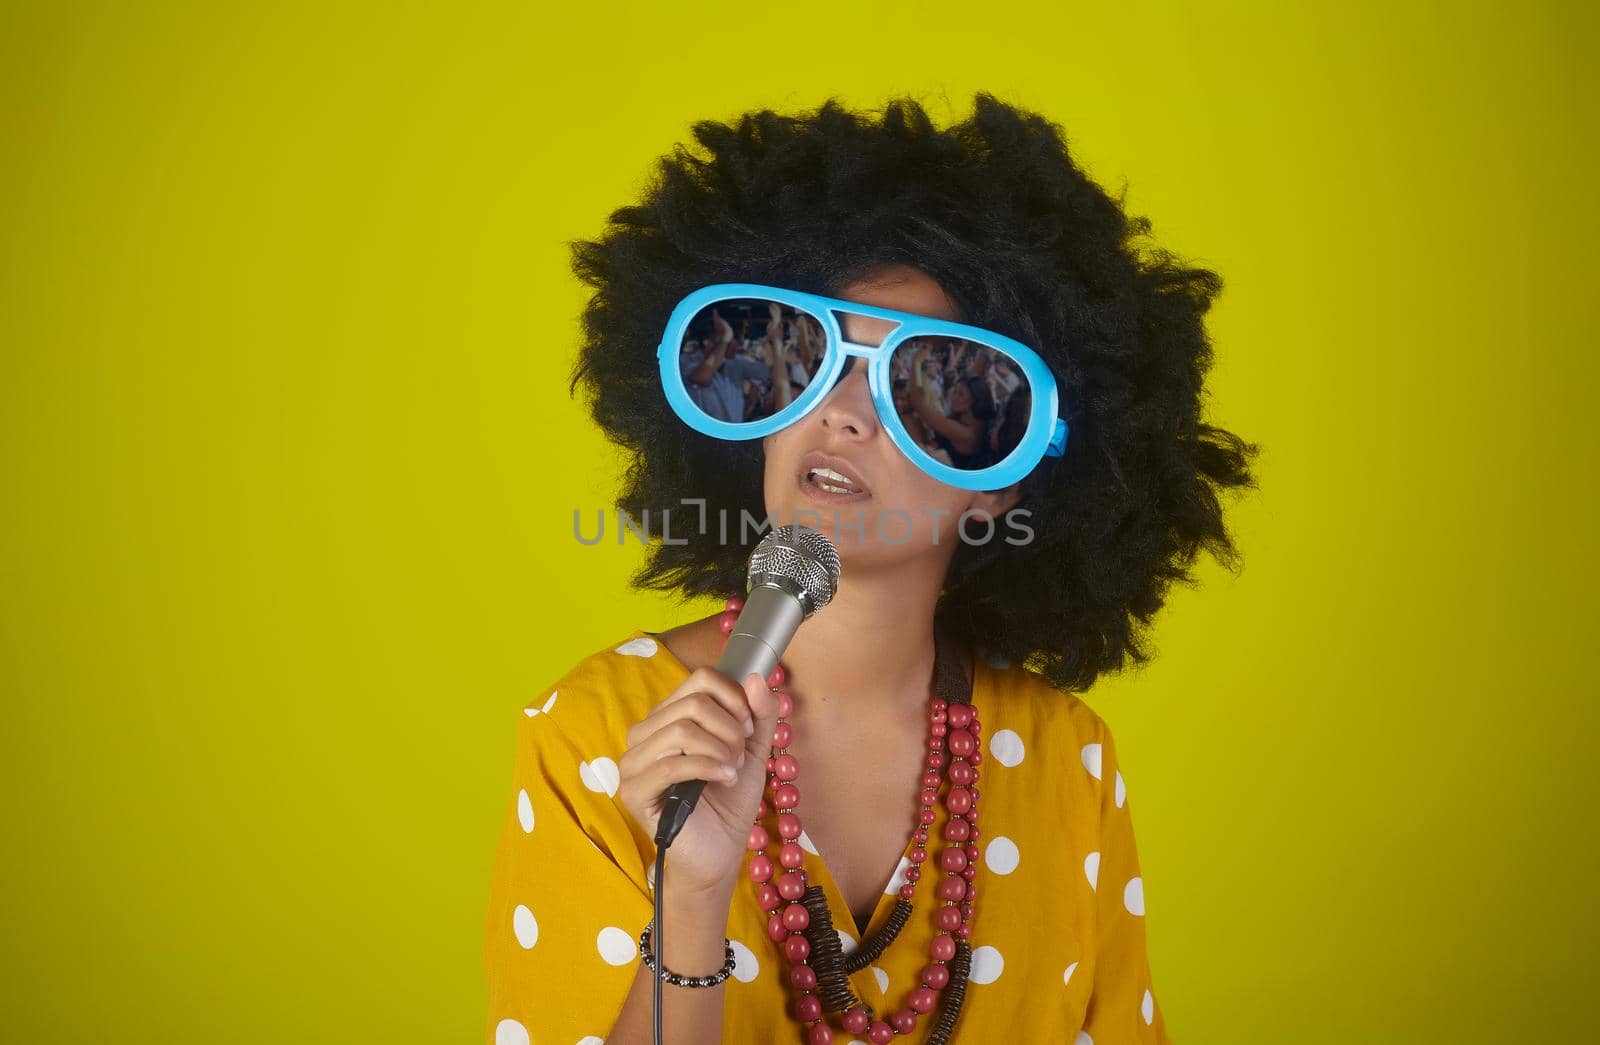 A beautiful woman with the curly afro hairstyle and funny sunglasses singing using a microphone on yellow background